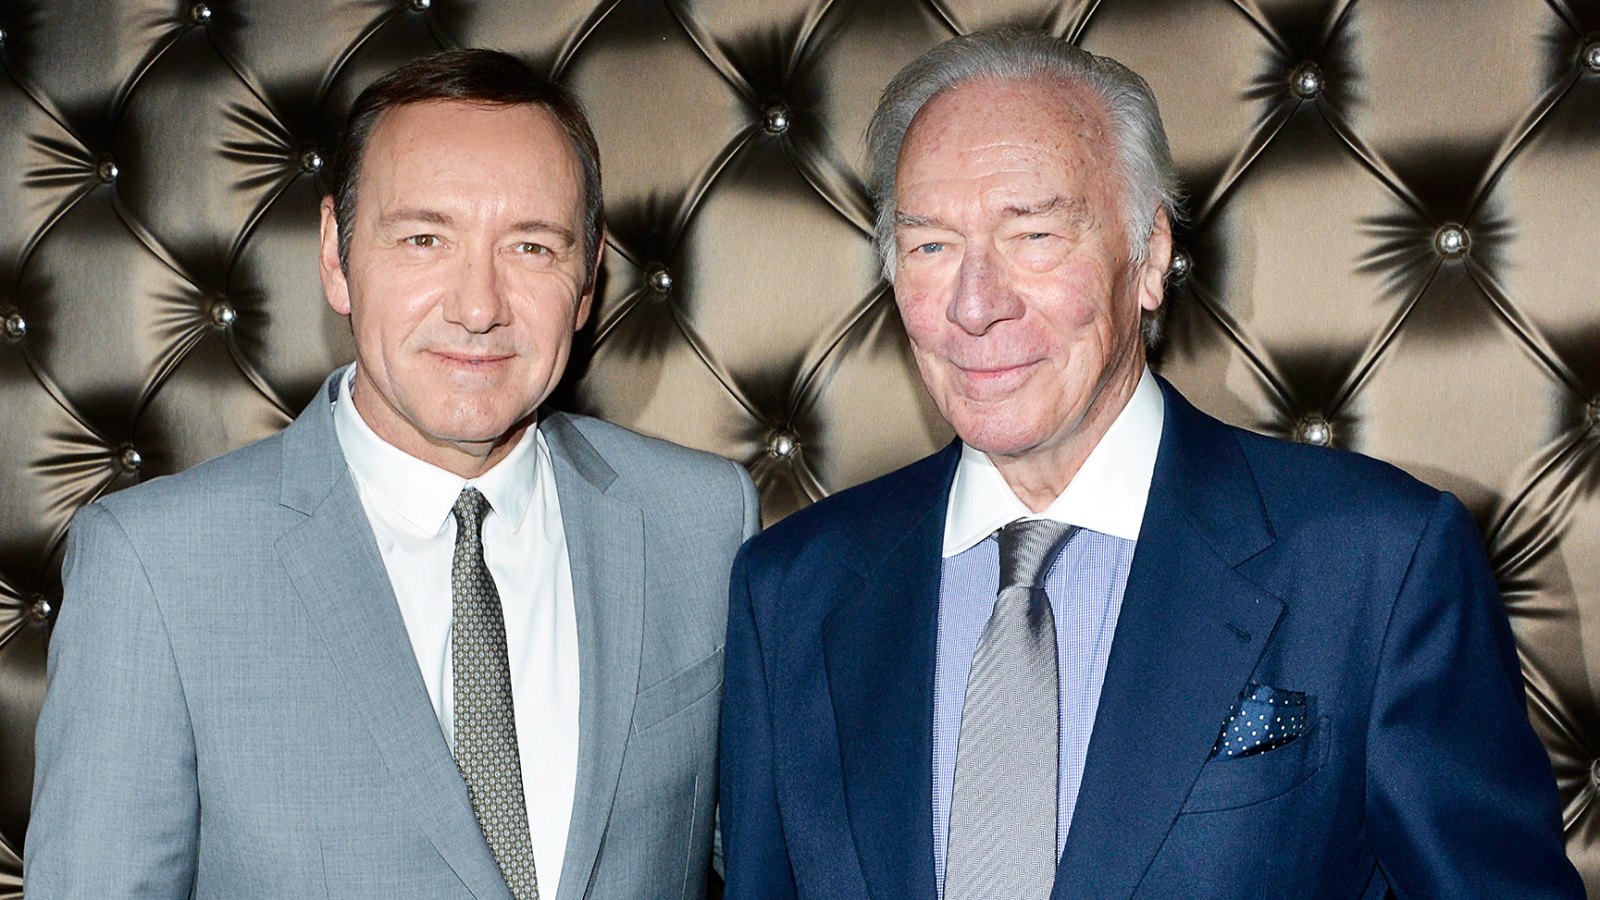 Christopher Plummer replaced Kevin Spacey All the Money in the World